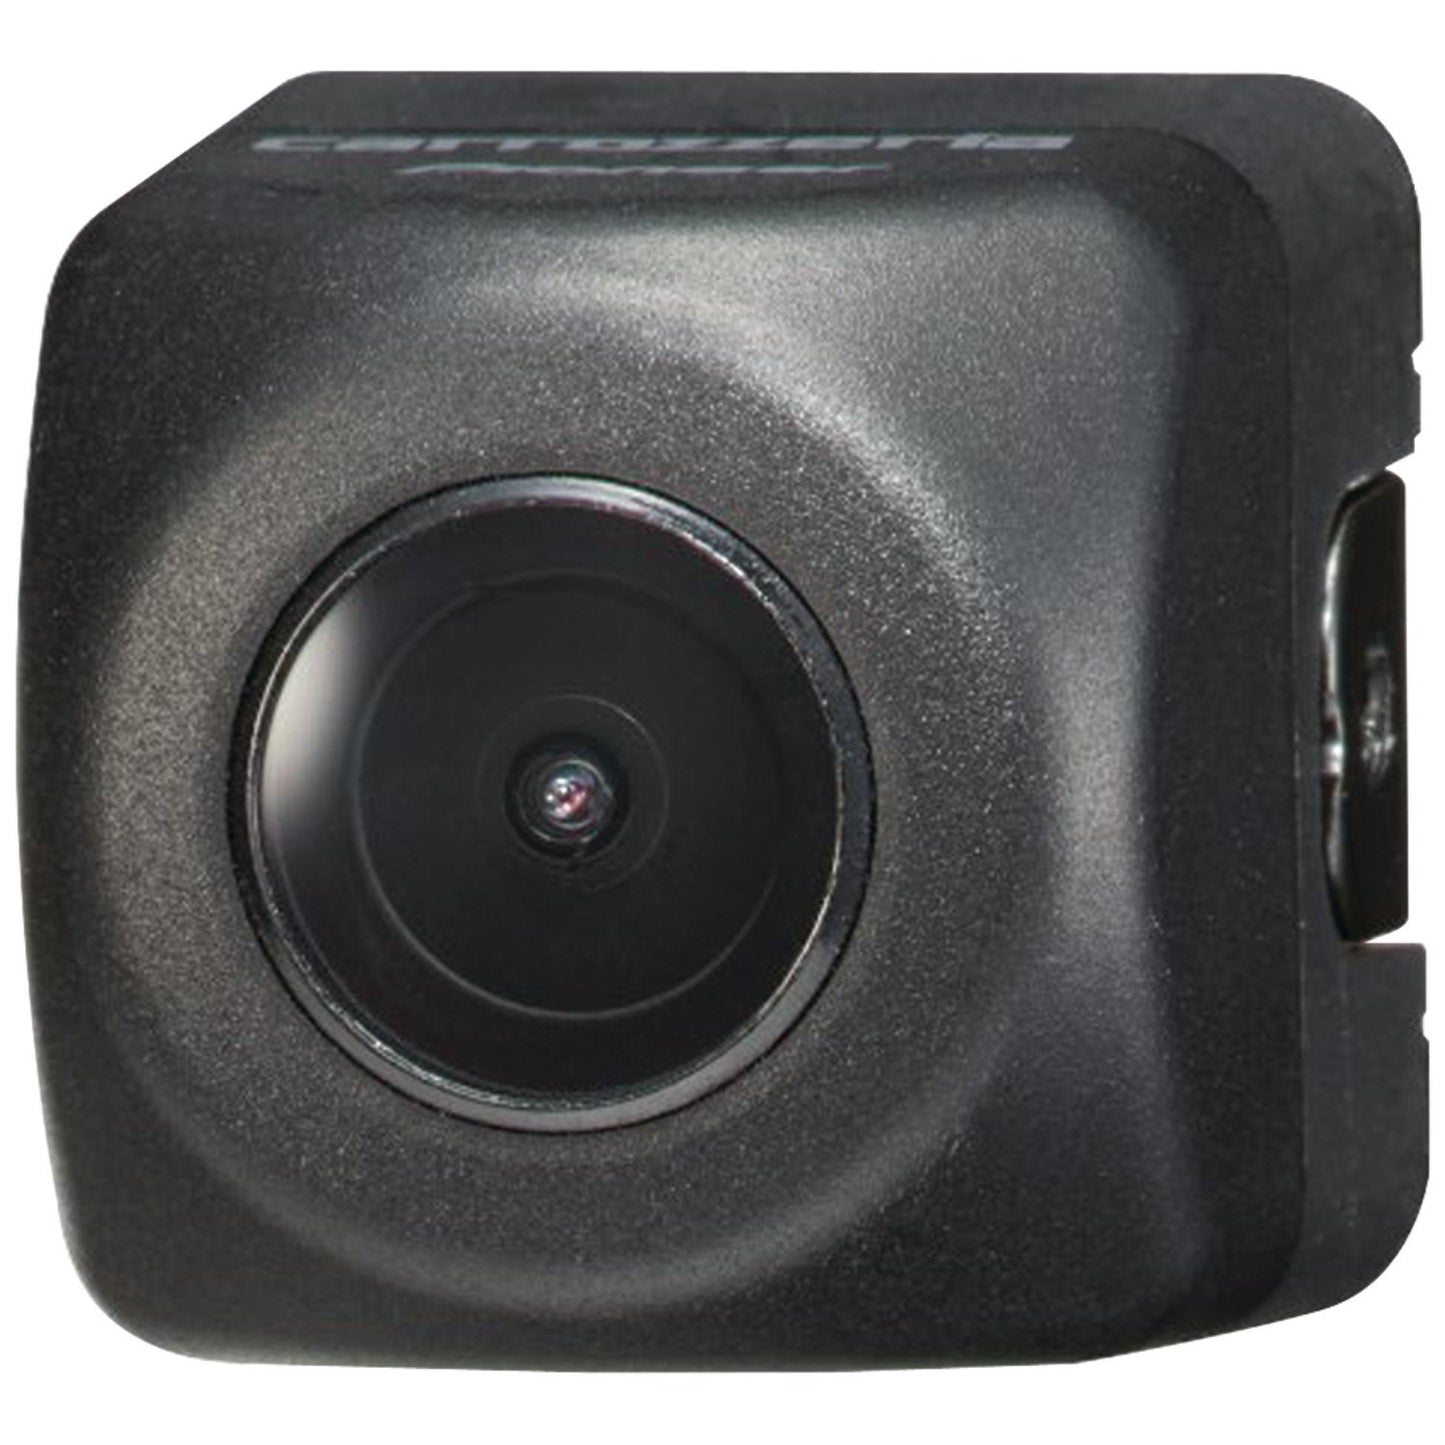 Pioneer ND-BC8 Universal Rearview Camera